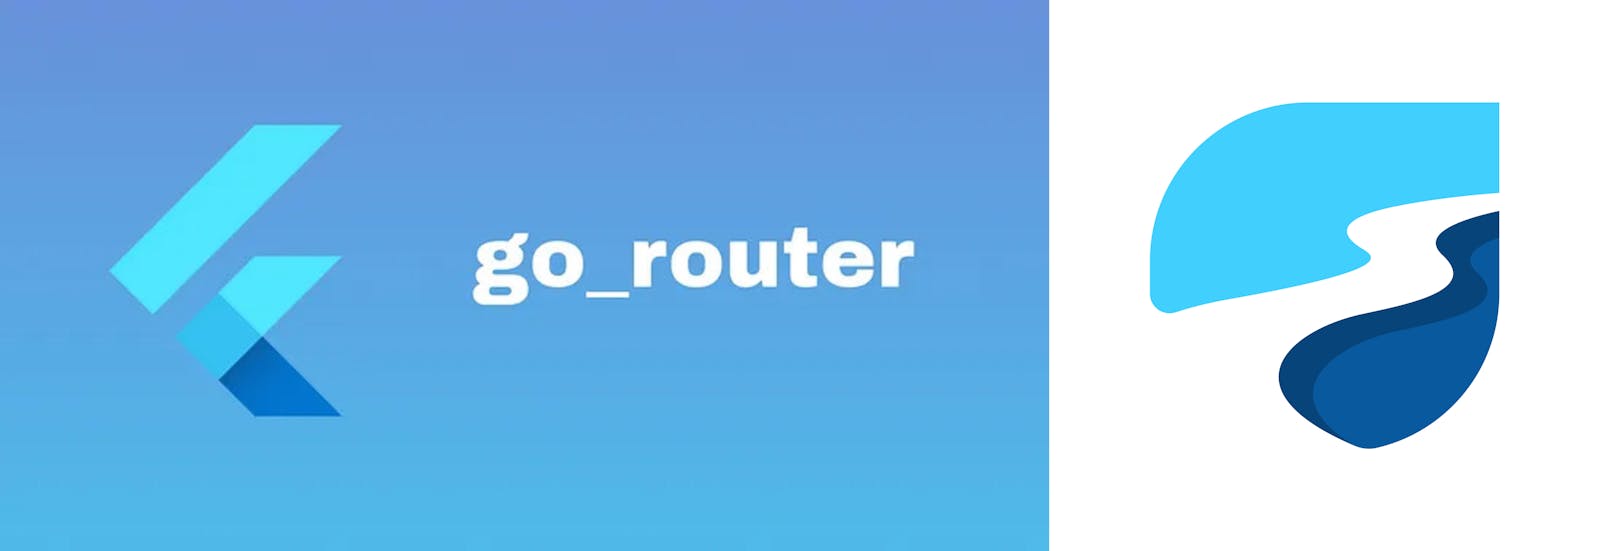 Go Router + Riverpod Tutorial Series 3: Nested Routes with Authentication